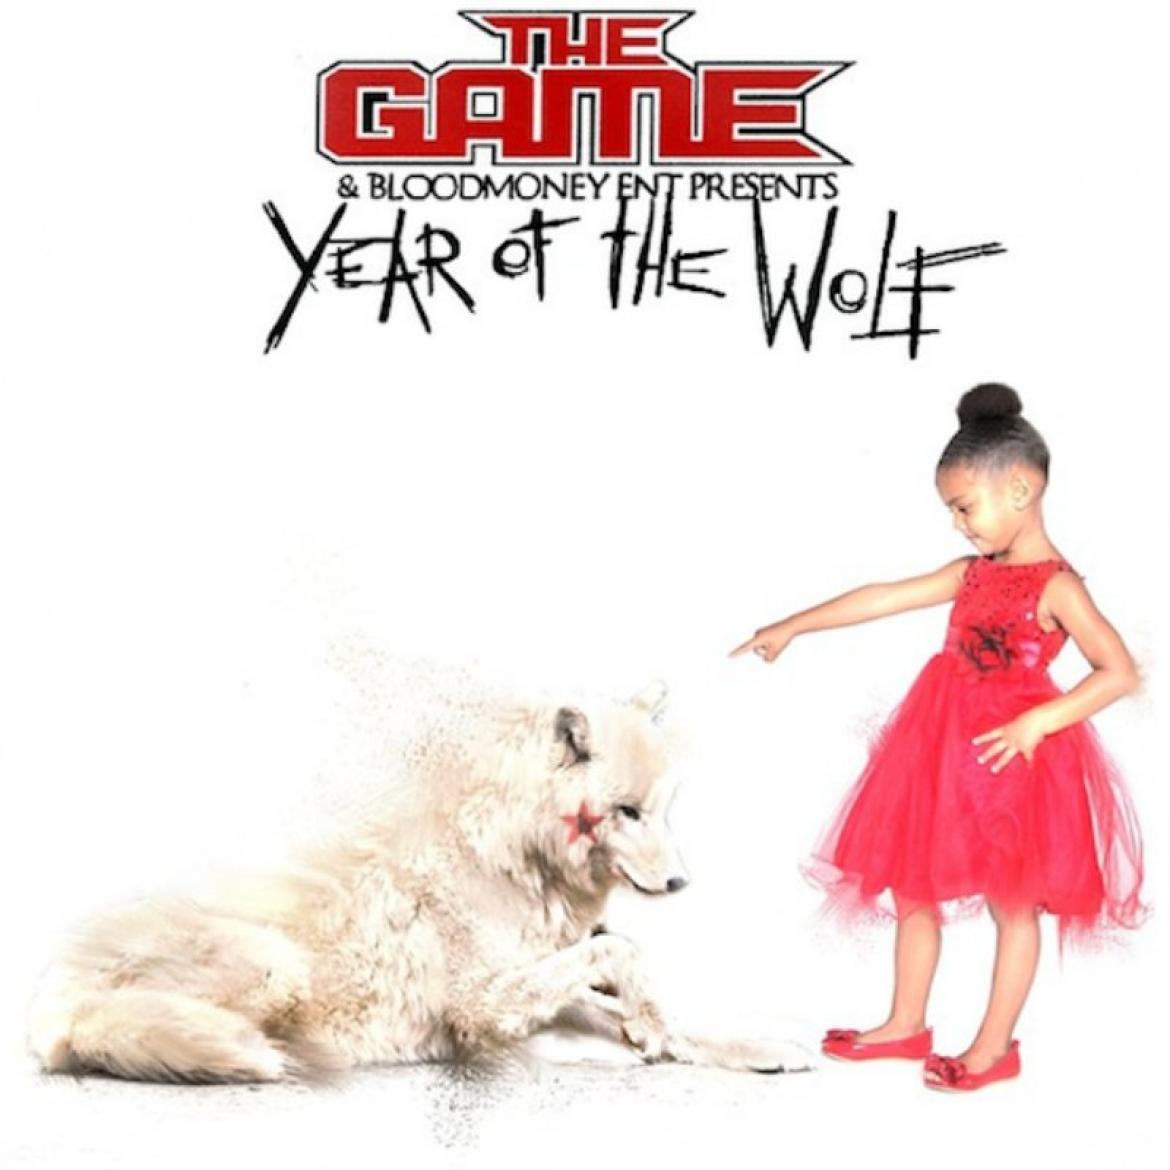 game_cover_xear_of_the_wolf_800_2014.jpg